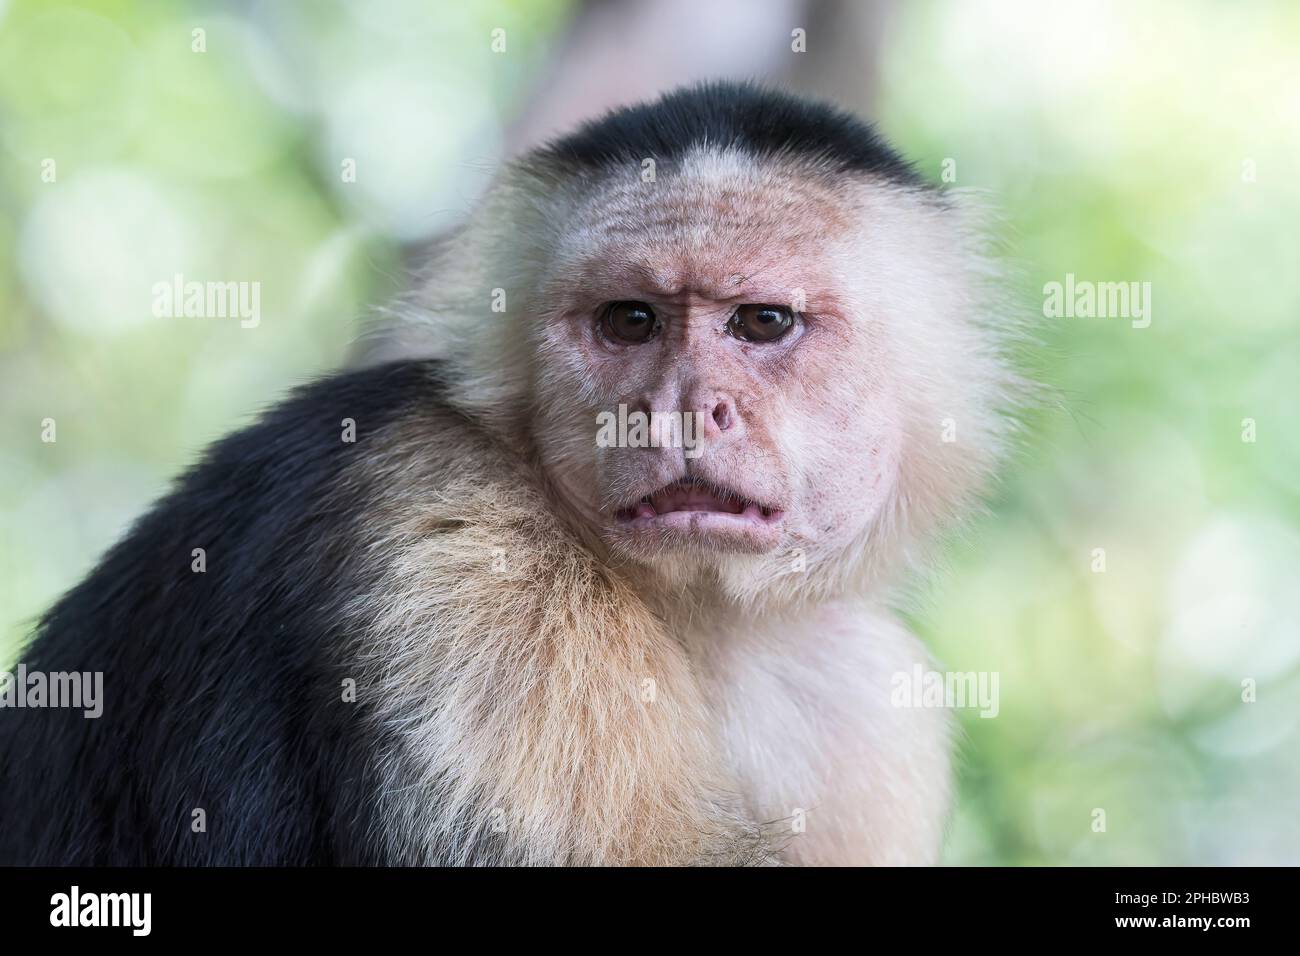 Panamanian white-faced capuchin monkey, Cebus imitator, close up of face of adult resting in tree in forest, Panama Stock Photo